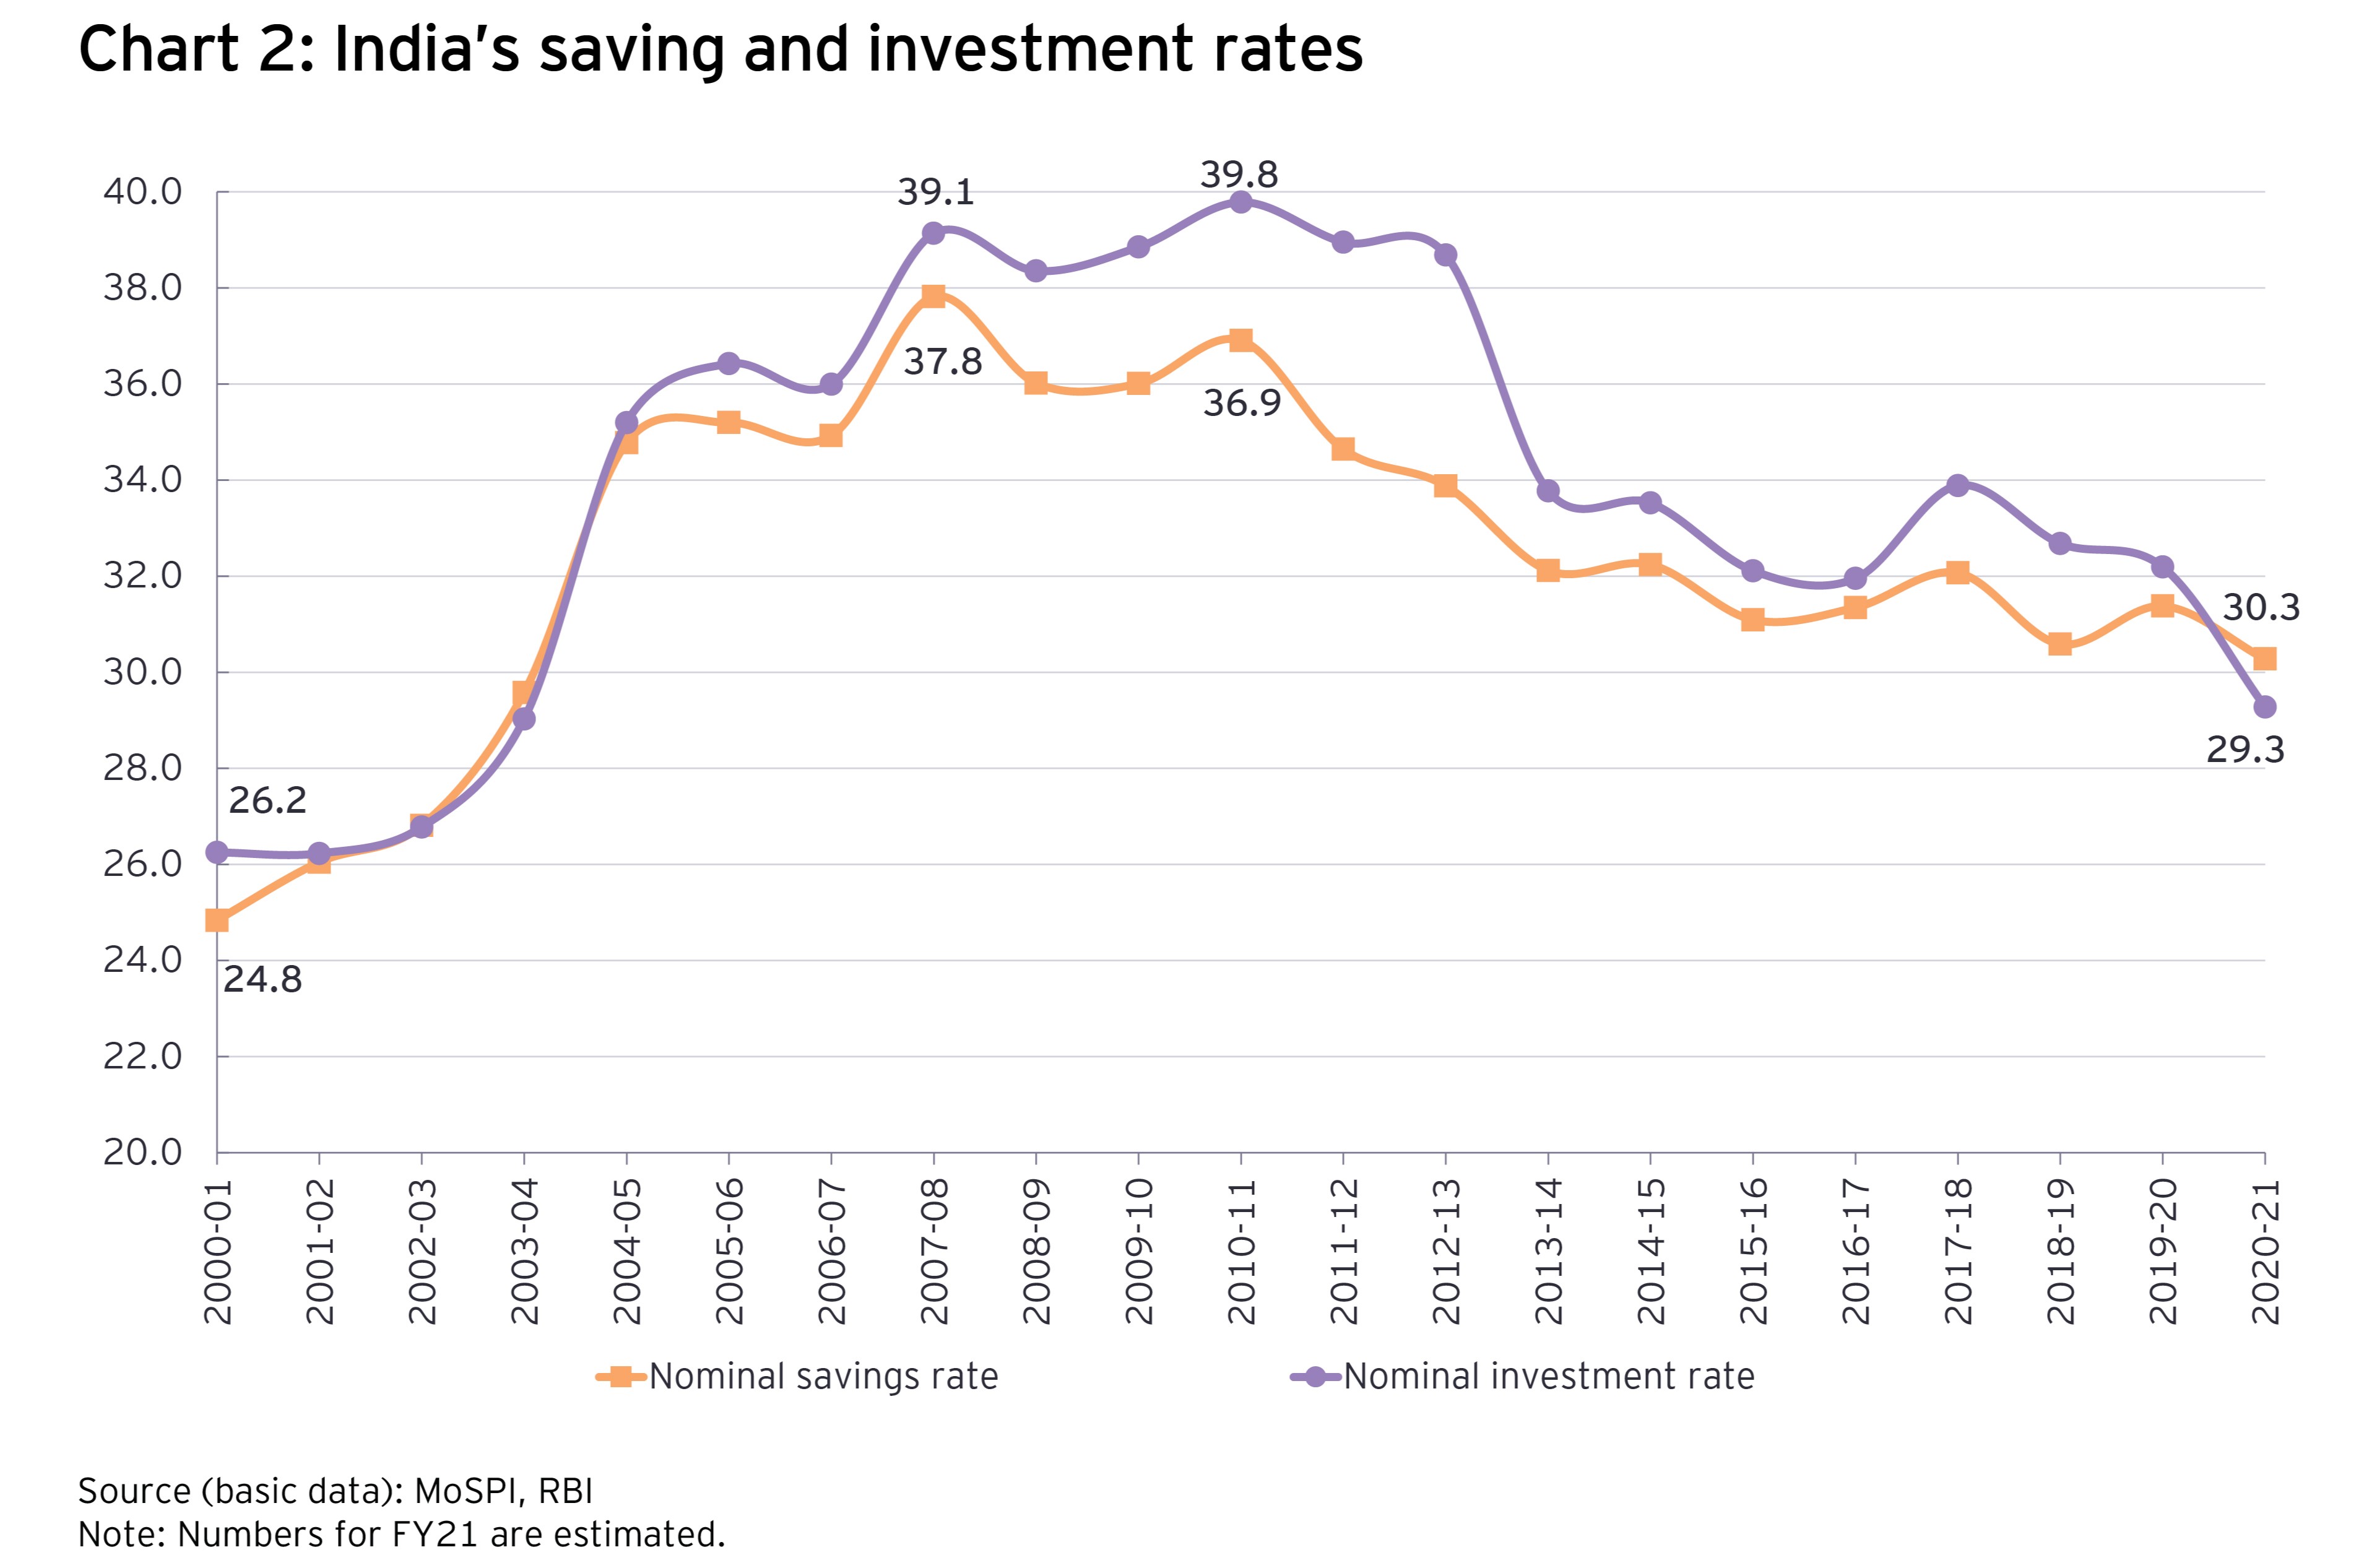 India’s saving and investment rates